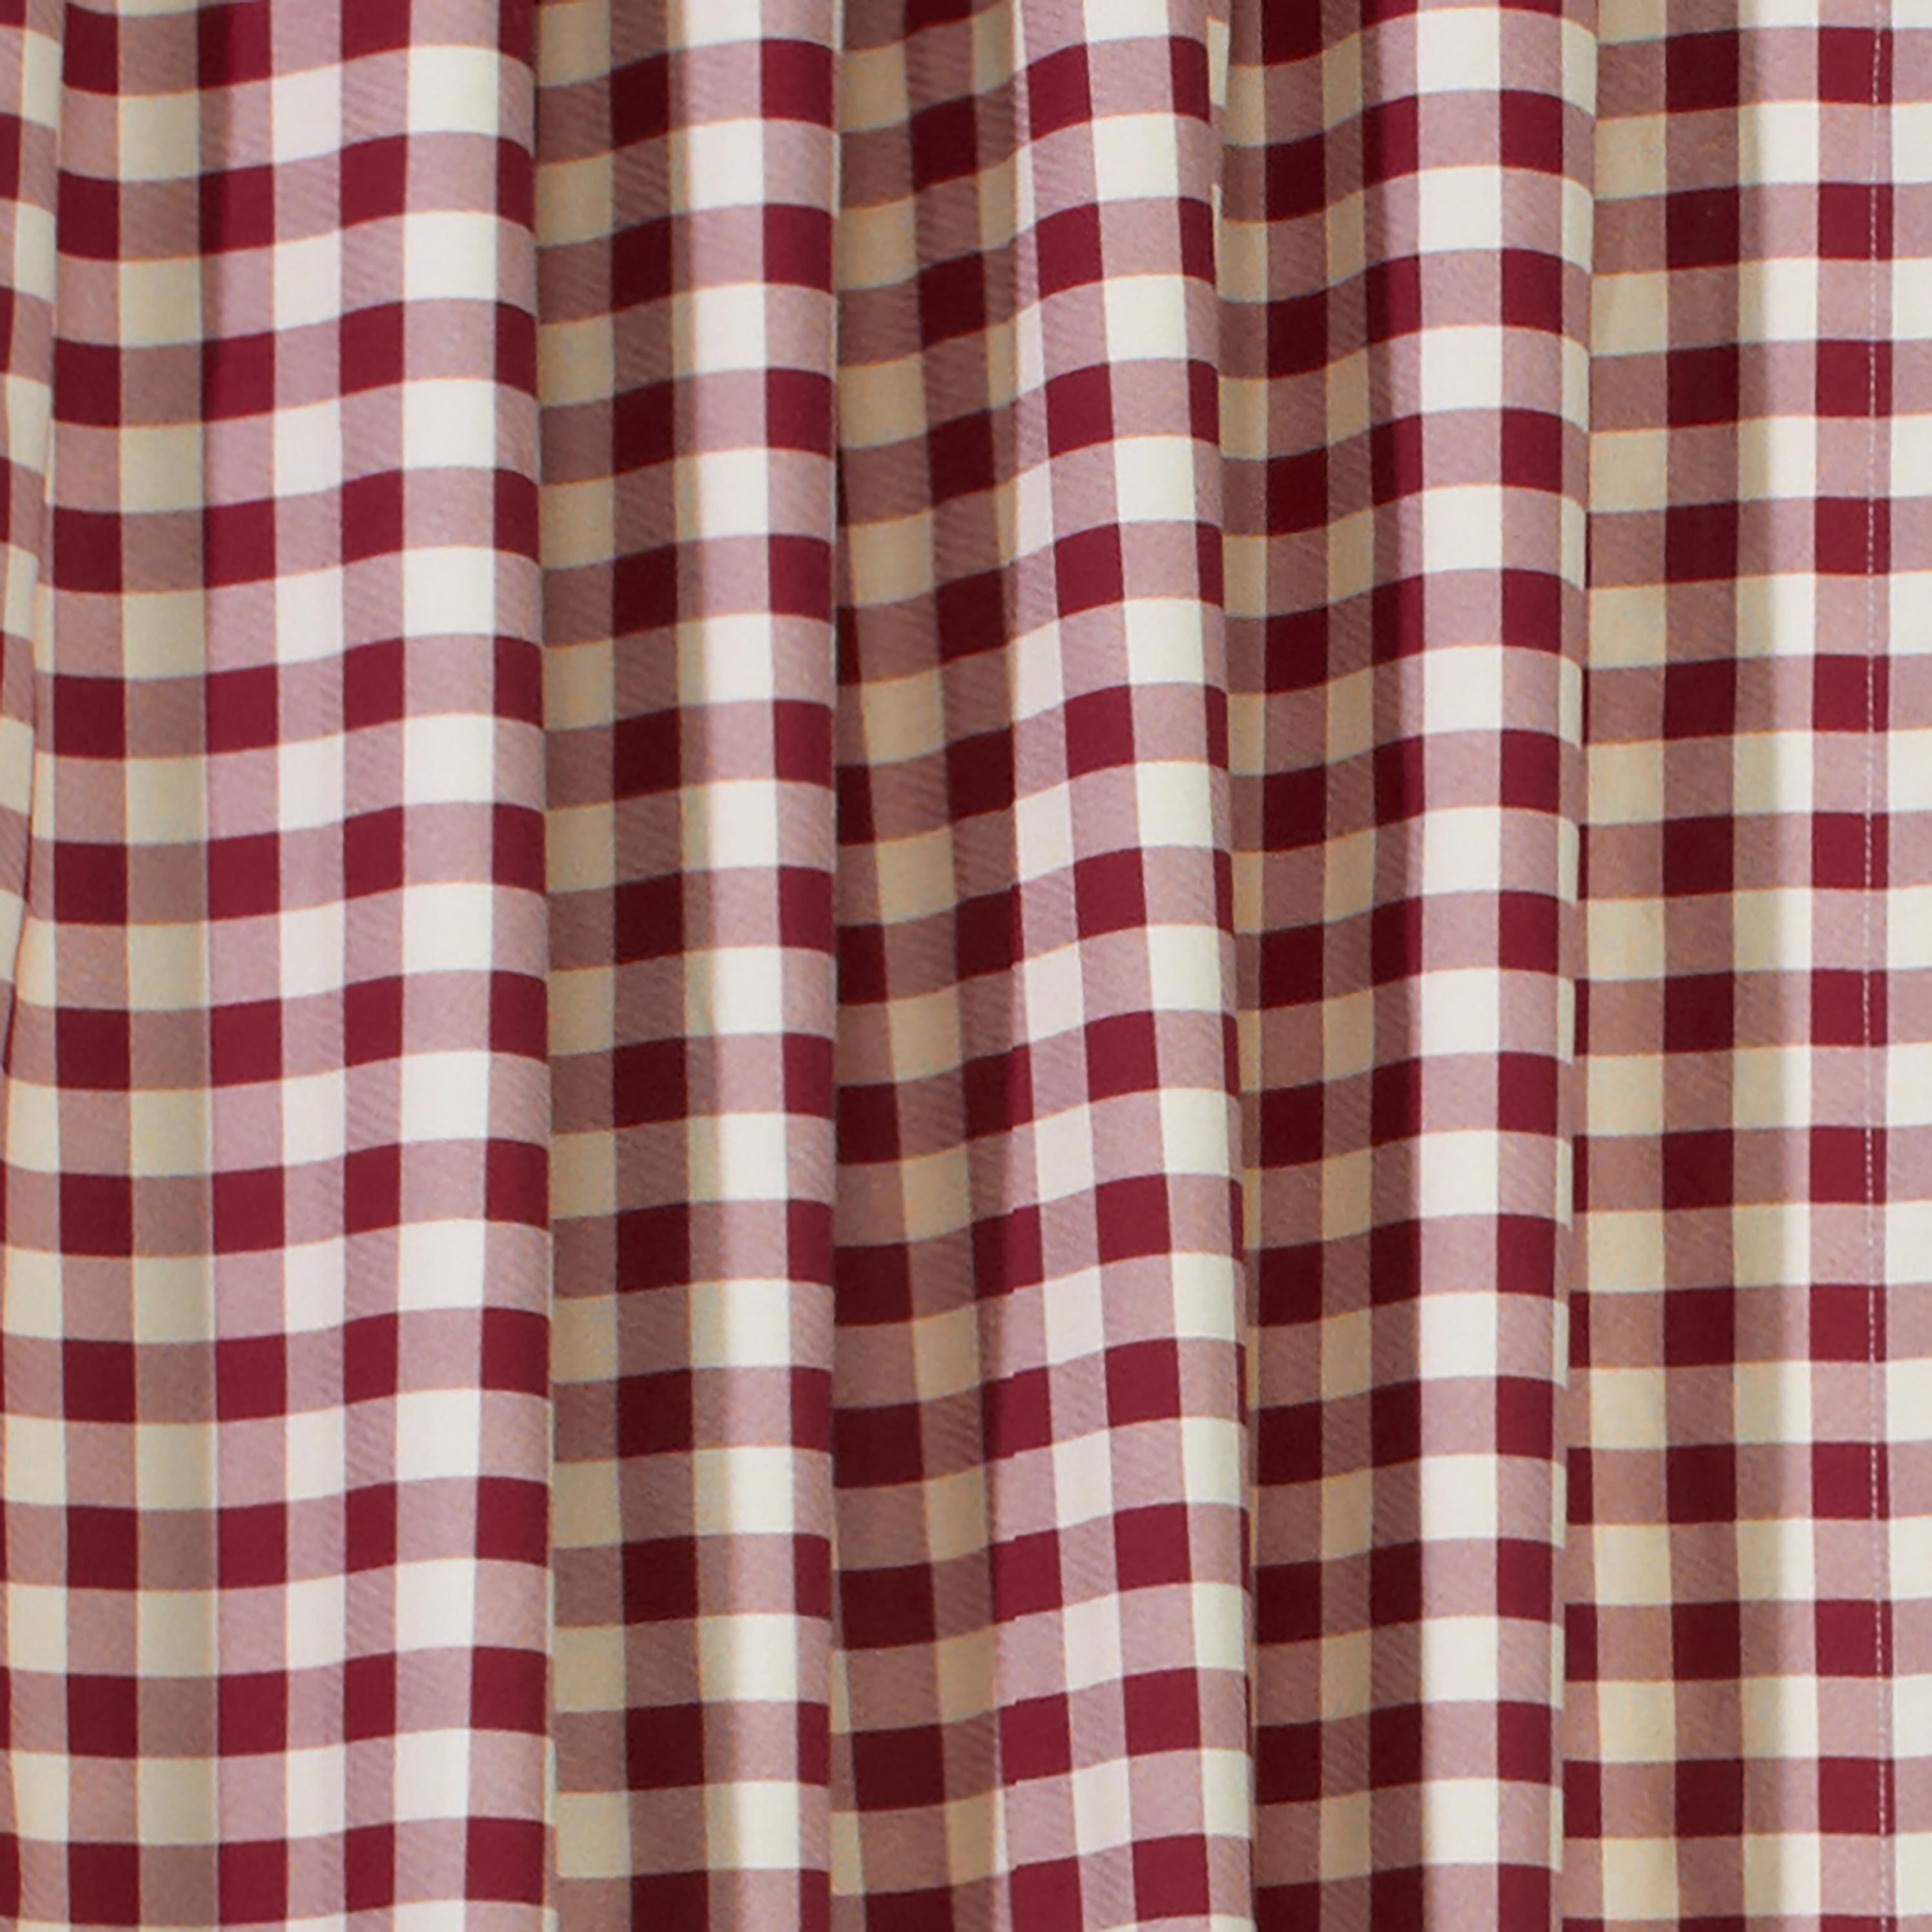 Image of 15"L x 40"W Thermalogic Check Tab-Top Valance Curtain, in Cranberry